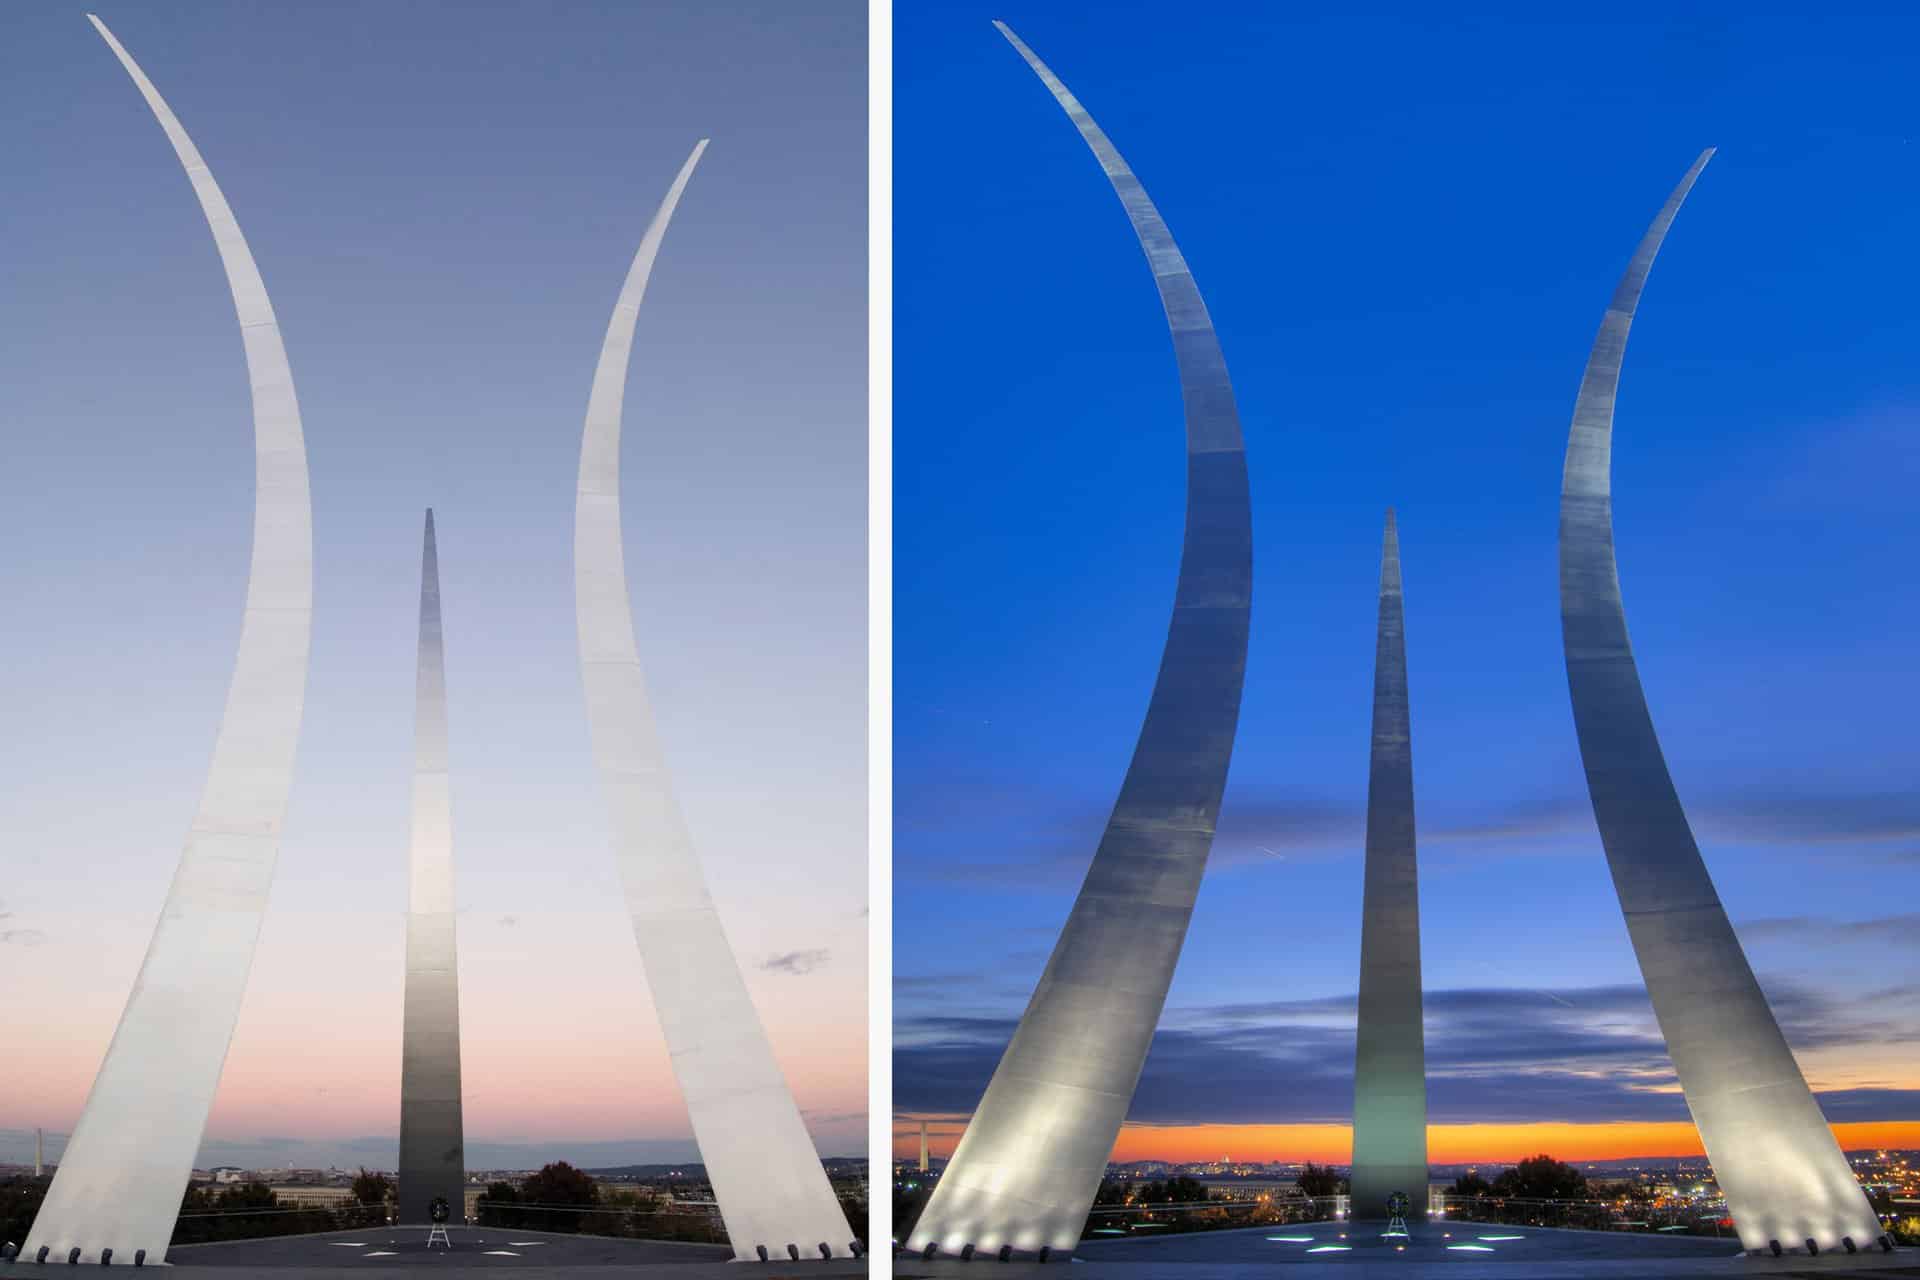 Air Force Memorial night and day images architectural lighting design OVI